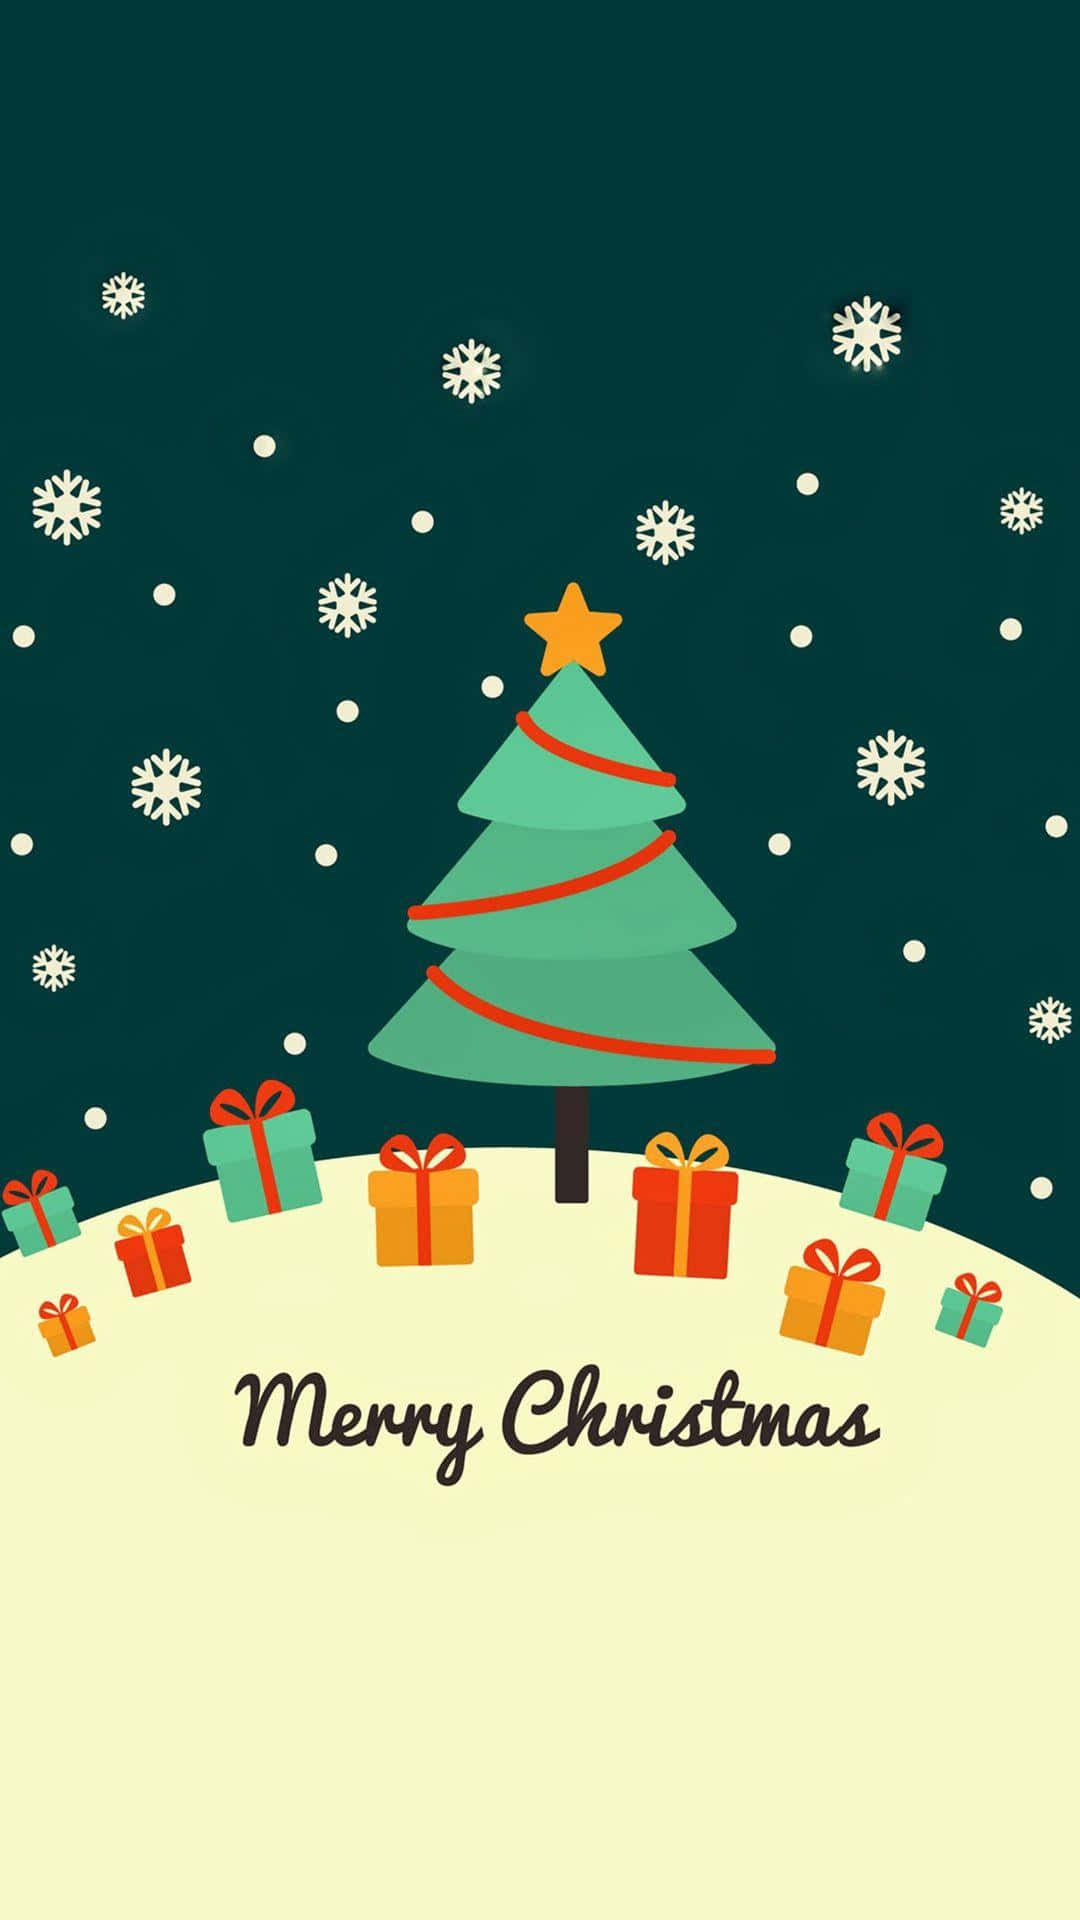 Merry Christmas Wallpapers With Presents And Tree